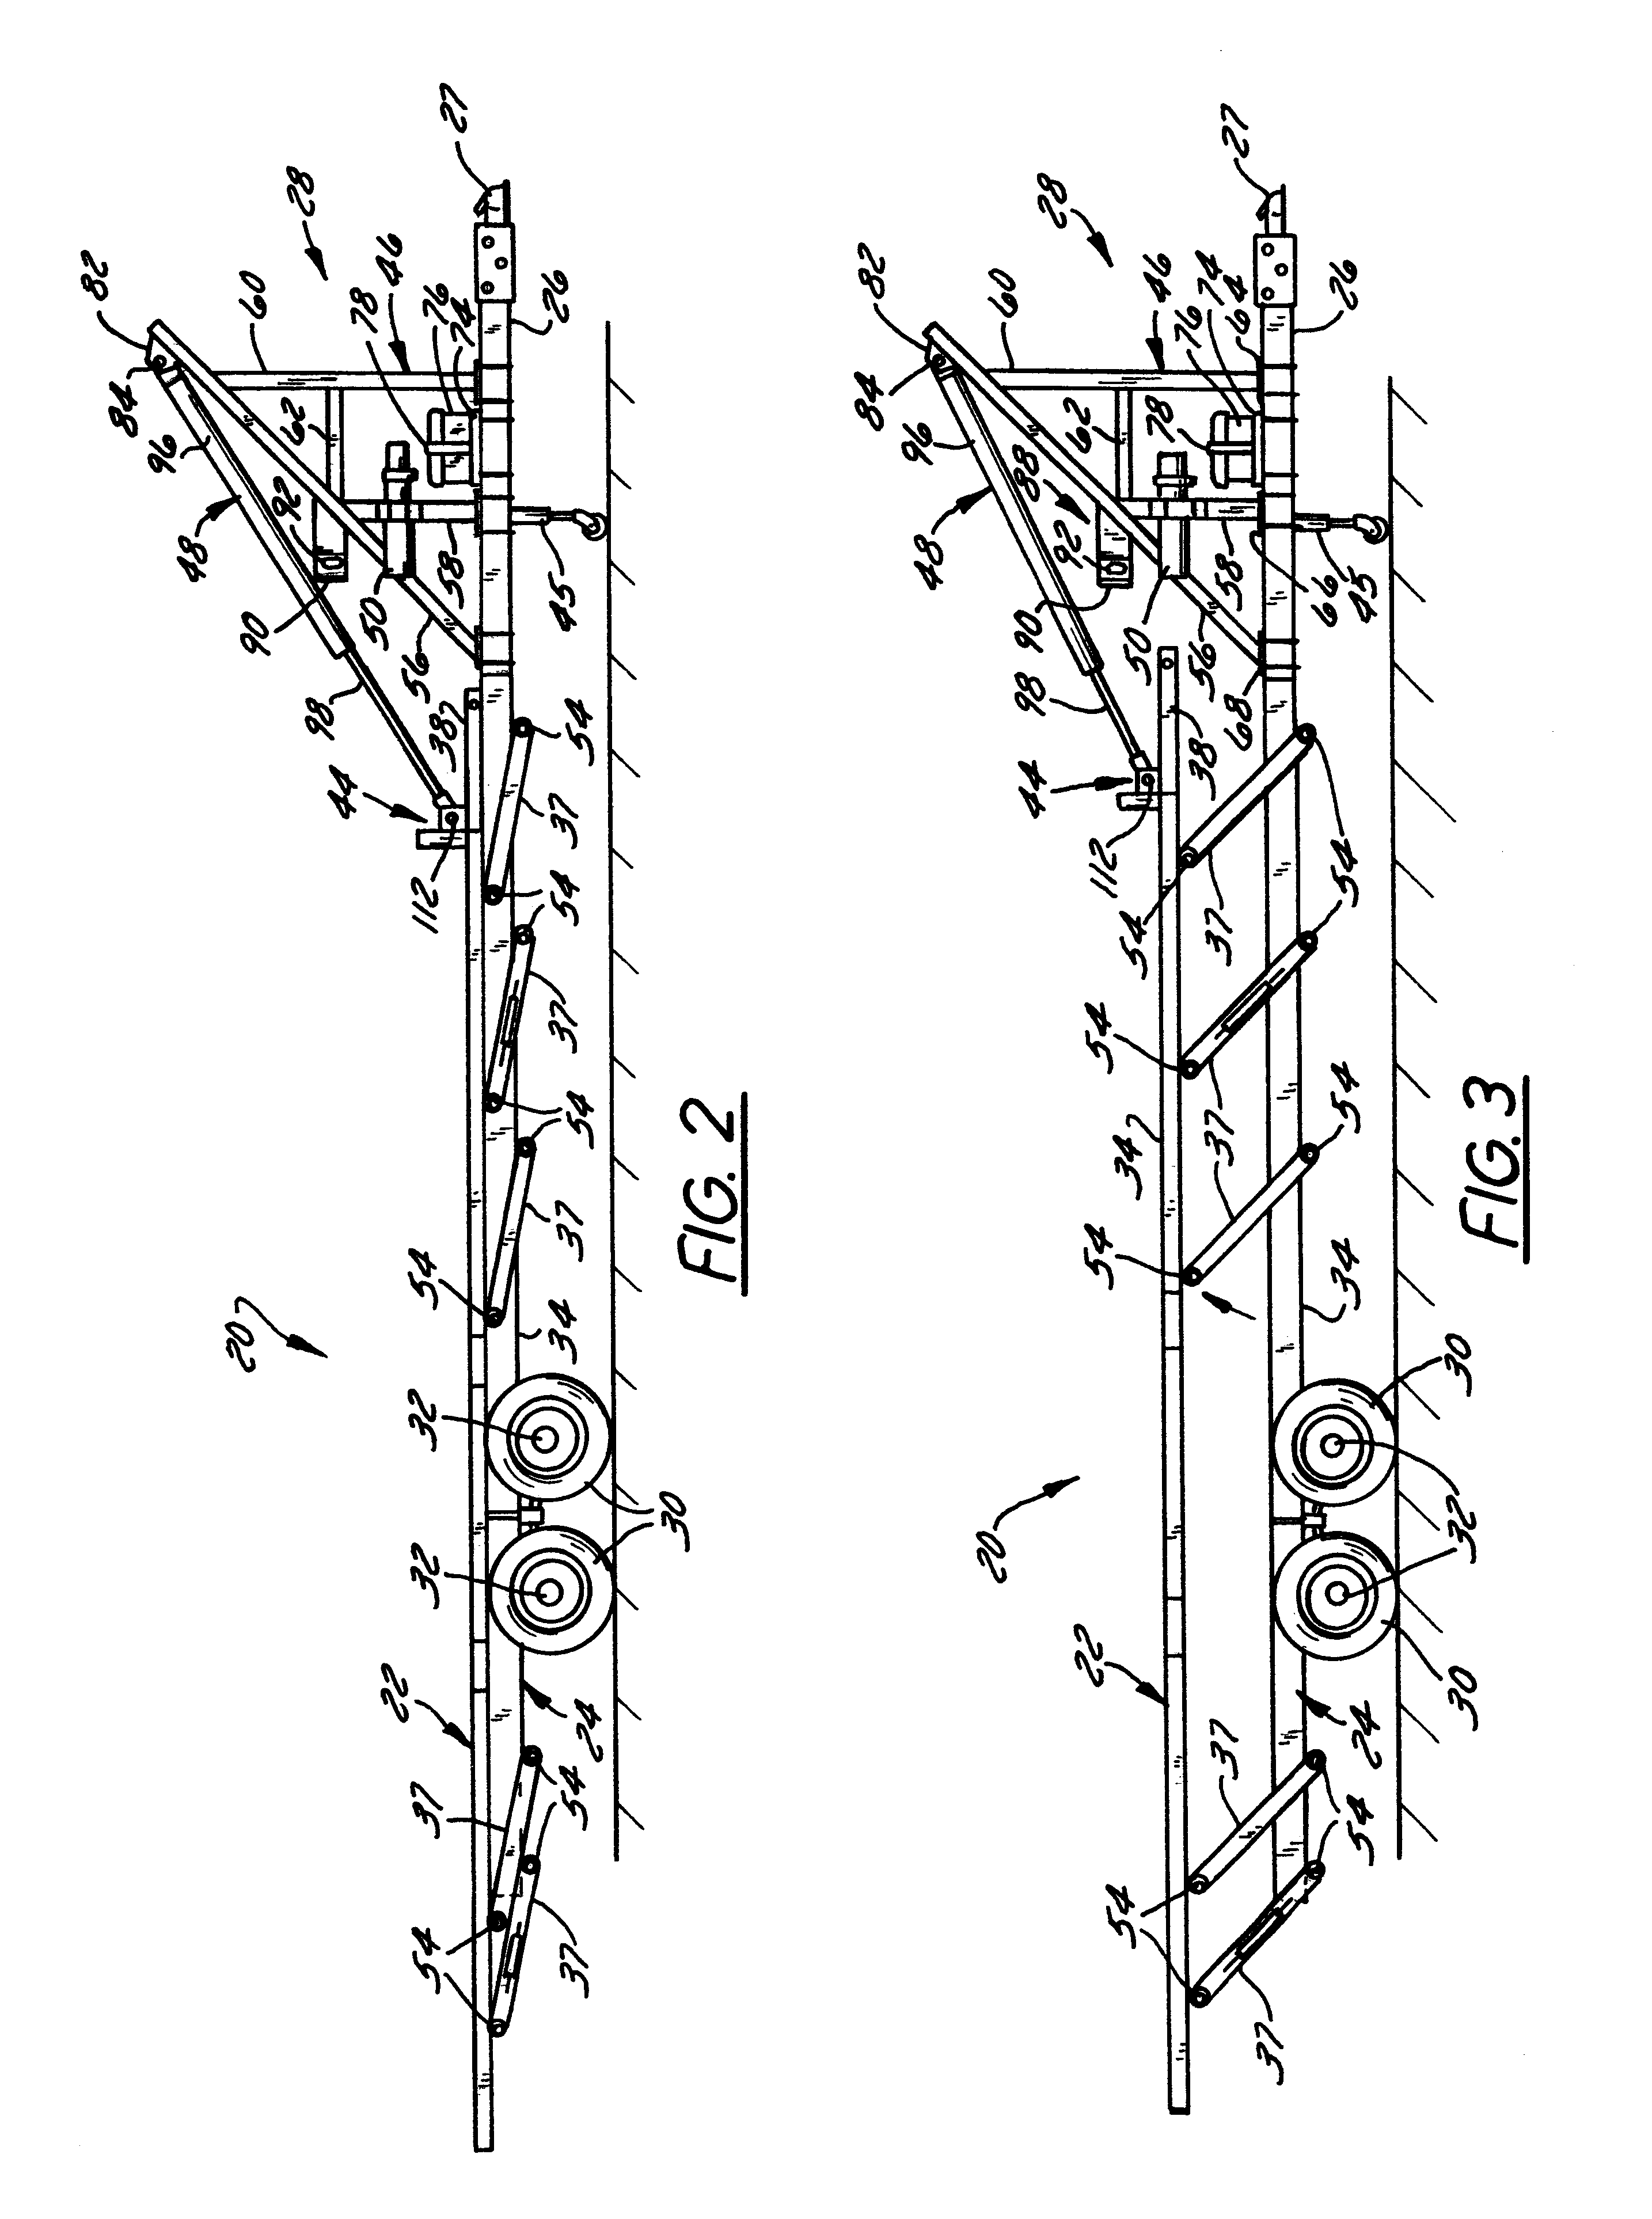 Trailer and lift assembly for same